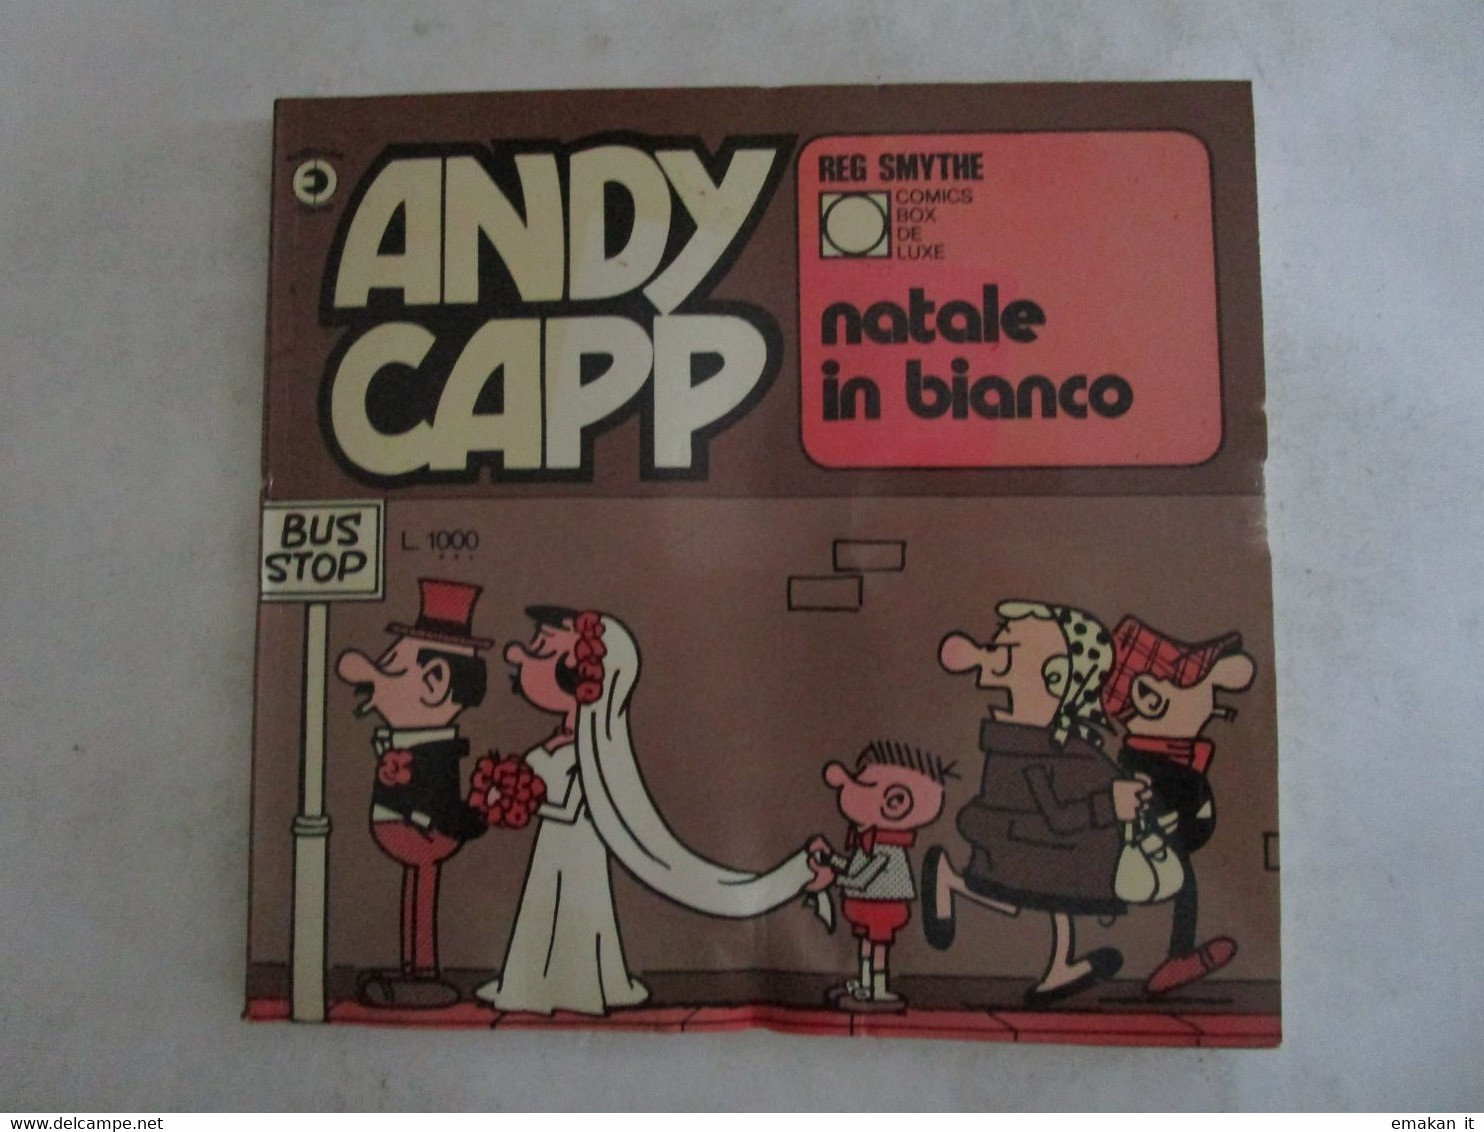 # ANDY CAPP N 30 / 1978 / COMICS BOX DE LUXE / NATALE IN BIANCO - First Editions